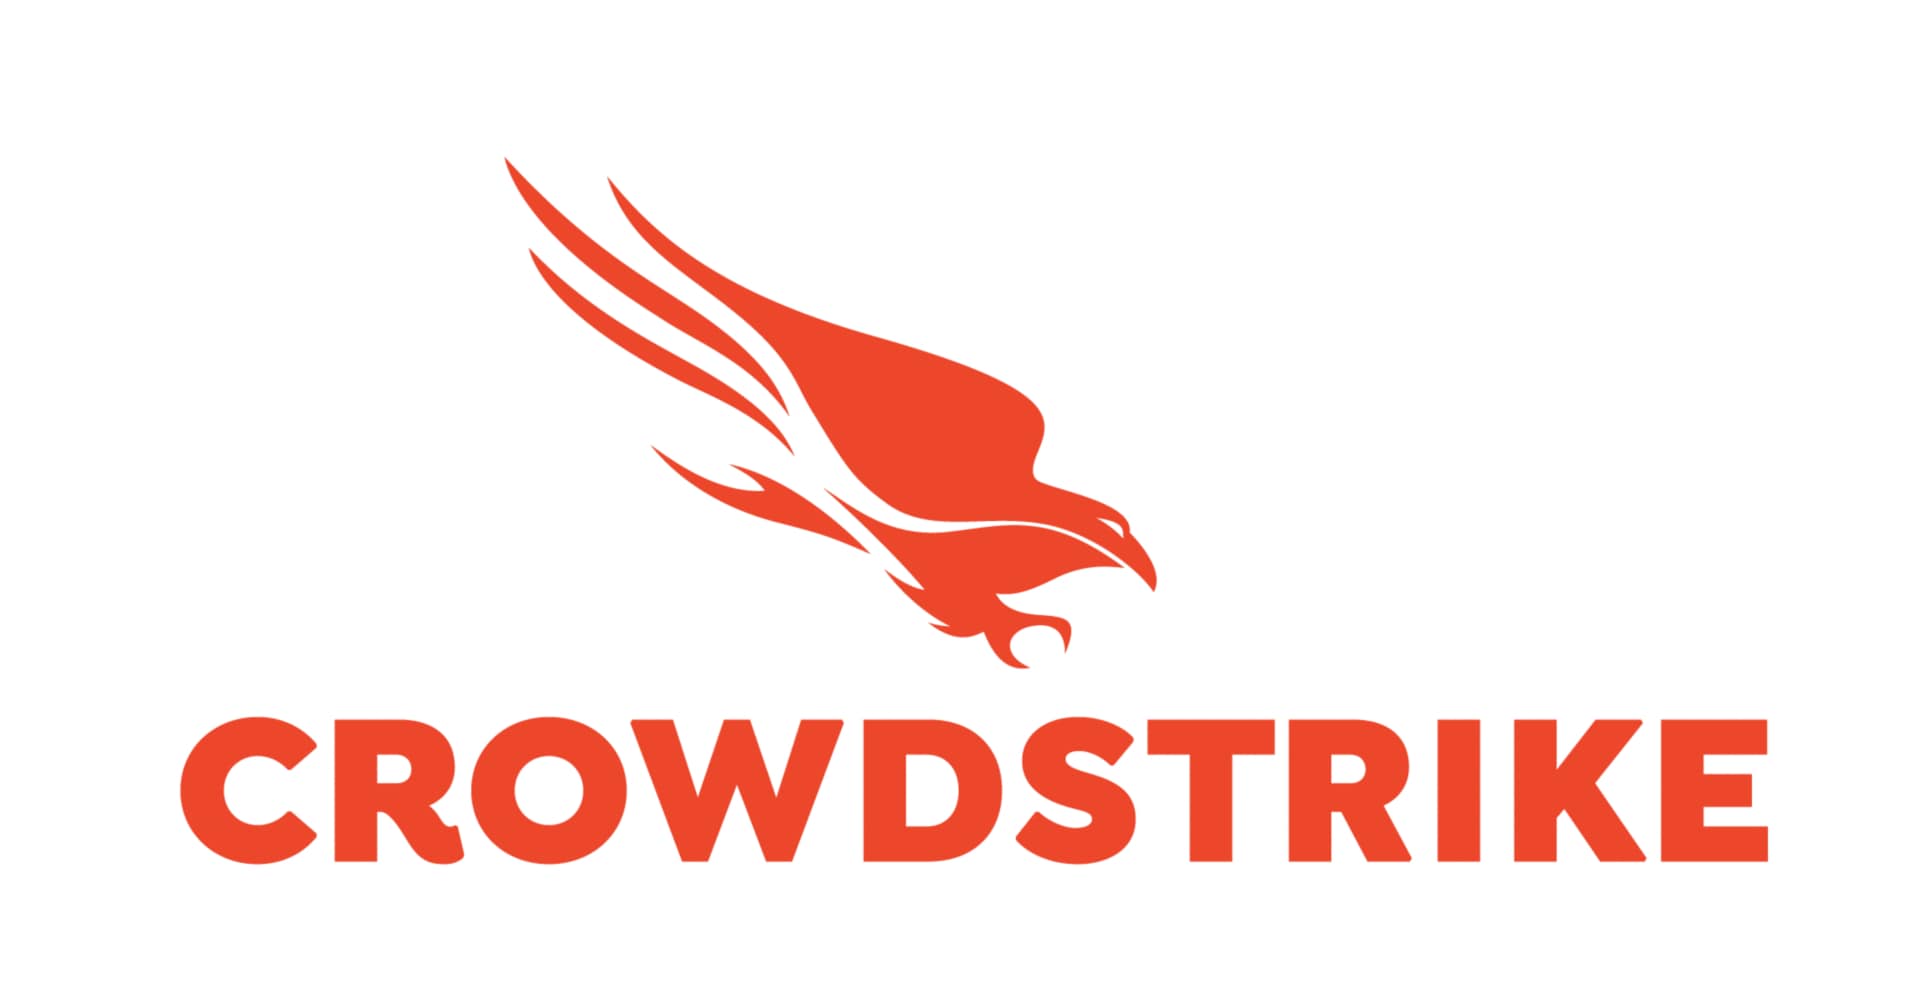 CrowdStrike 12-Month Identity Threat Protection Complete Bundle Software